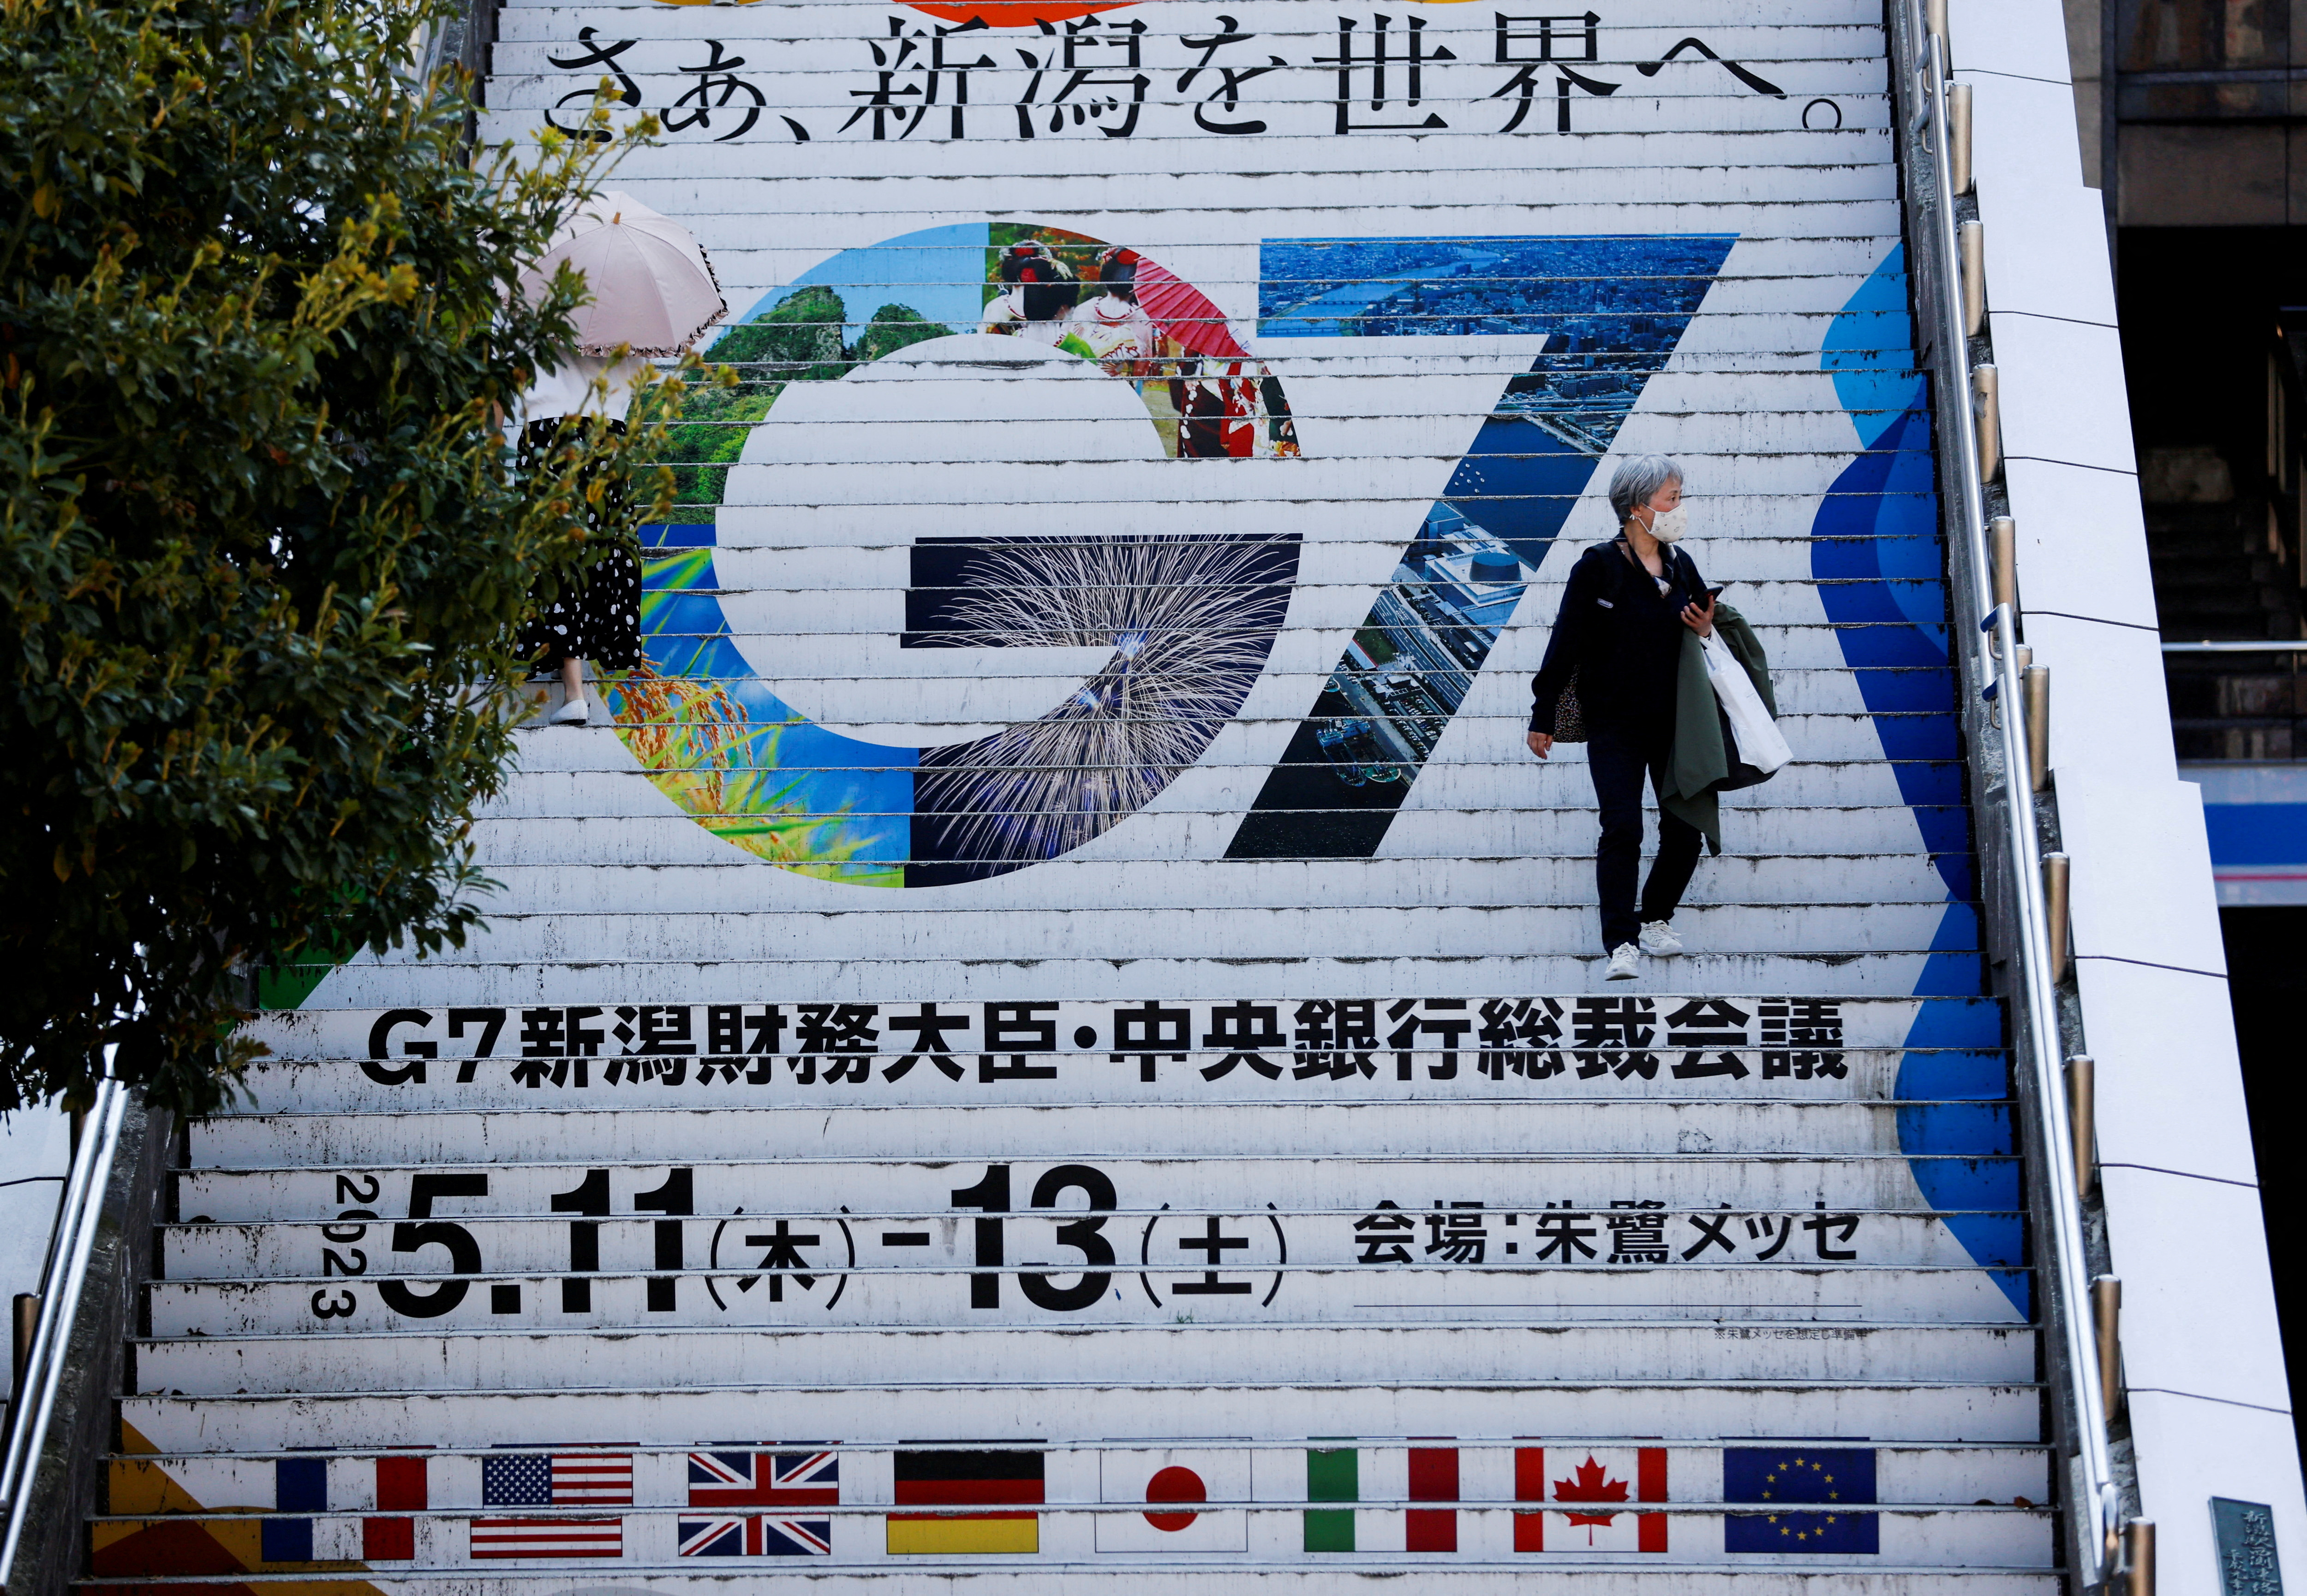 The logo of the G7 Finance Ministers and Central Bank Governors' meeting is displayed at Niigata station, ahead of the meeting, in Niigata